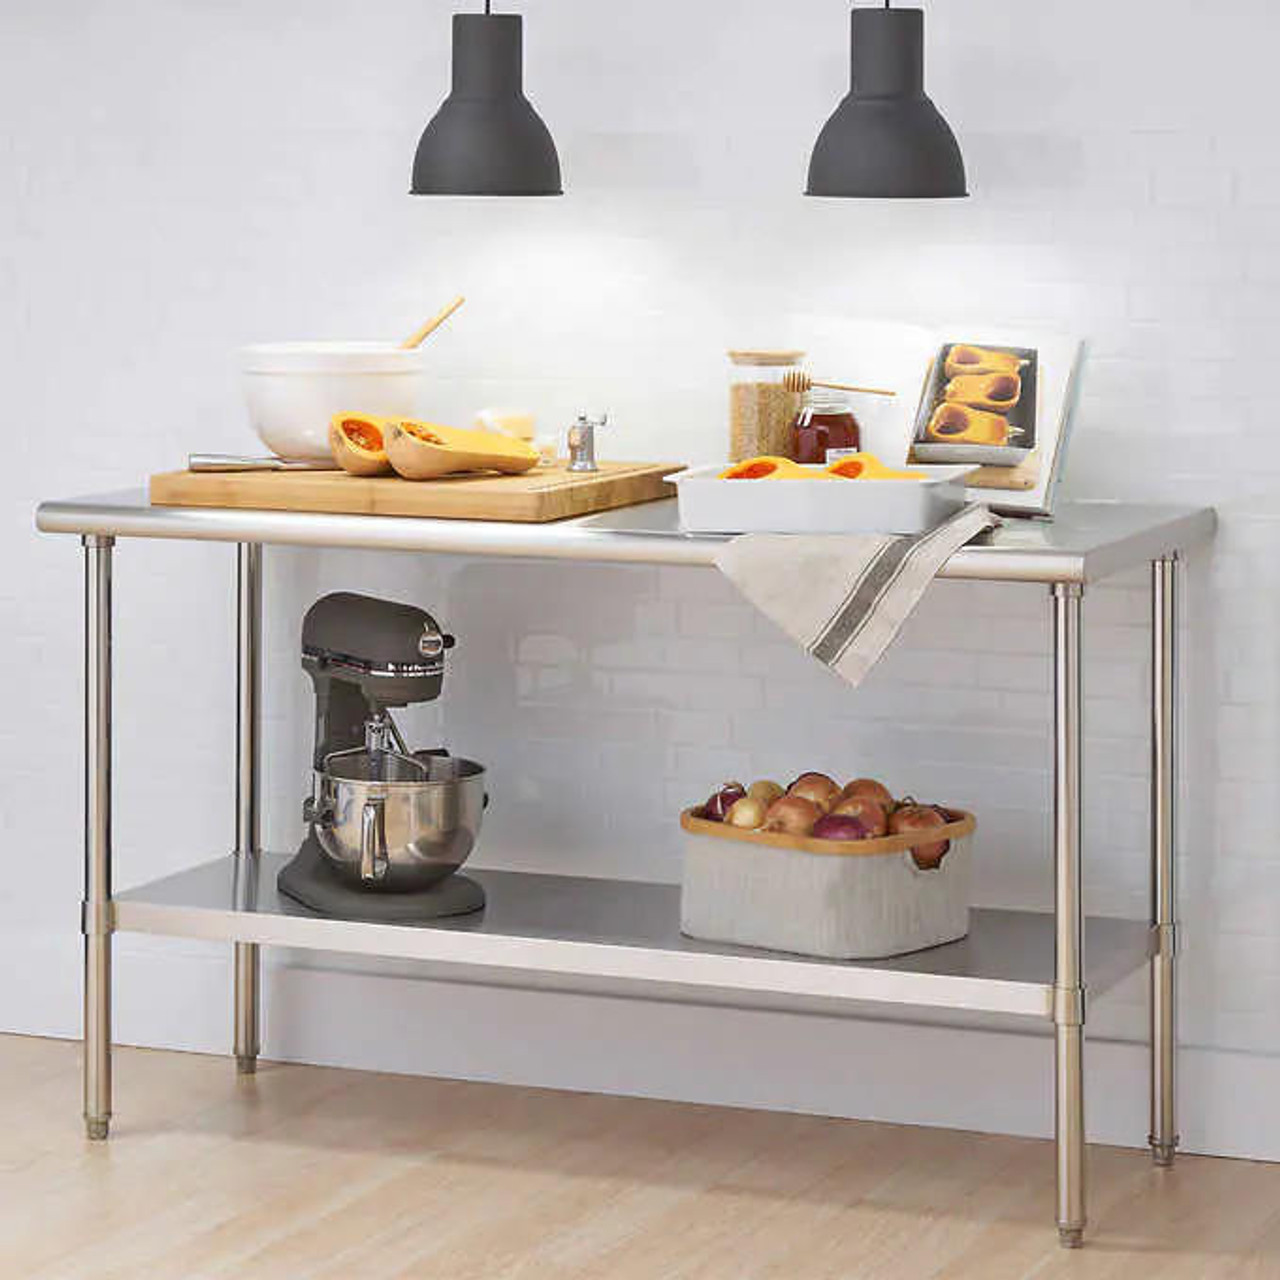 TRINITY EcoStorage Stainless-Steel 152 cm (60 in.) Table - Versatile and Durable Workspace Solution- Chicken Pieces